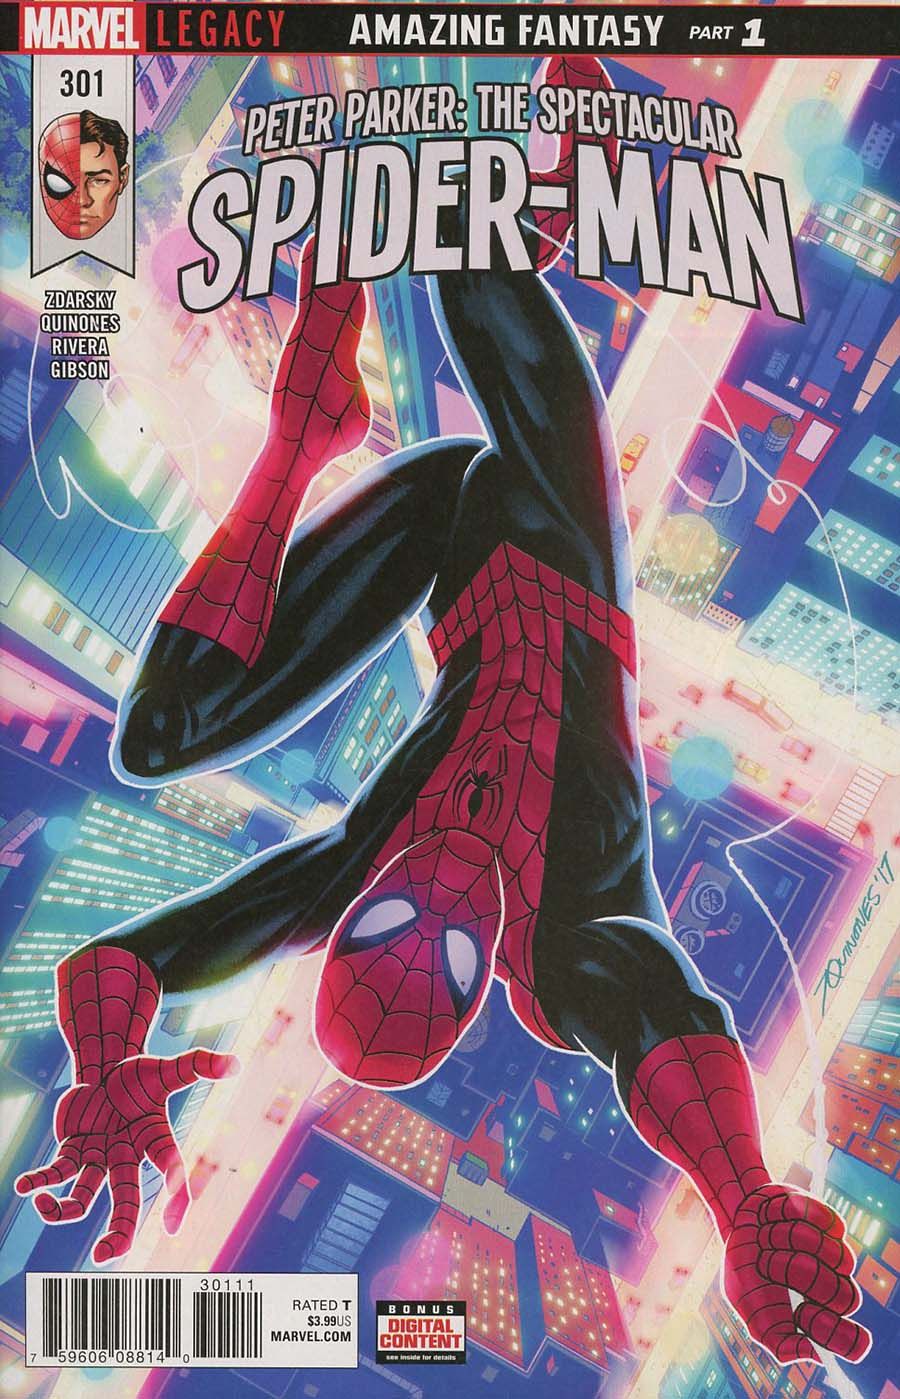 Peter Parker: The Spectacular Spider-man #301 Comic